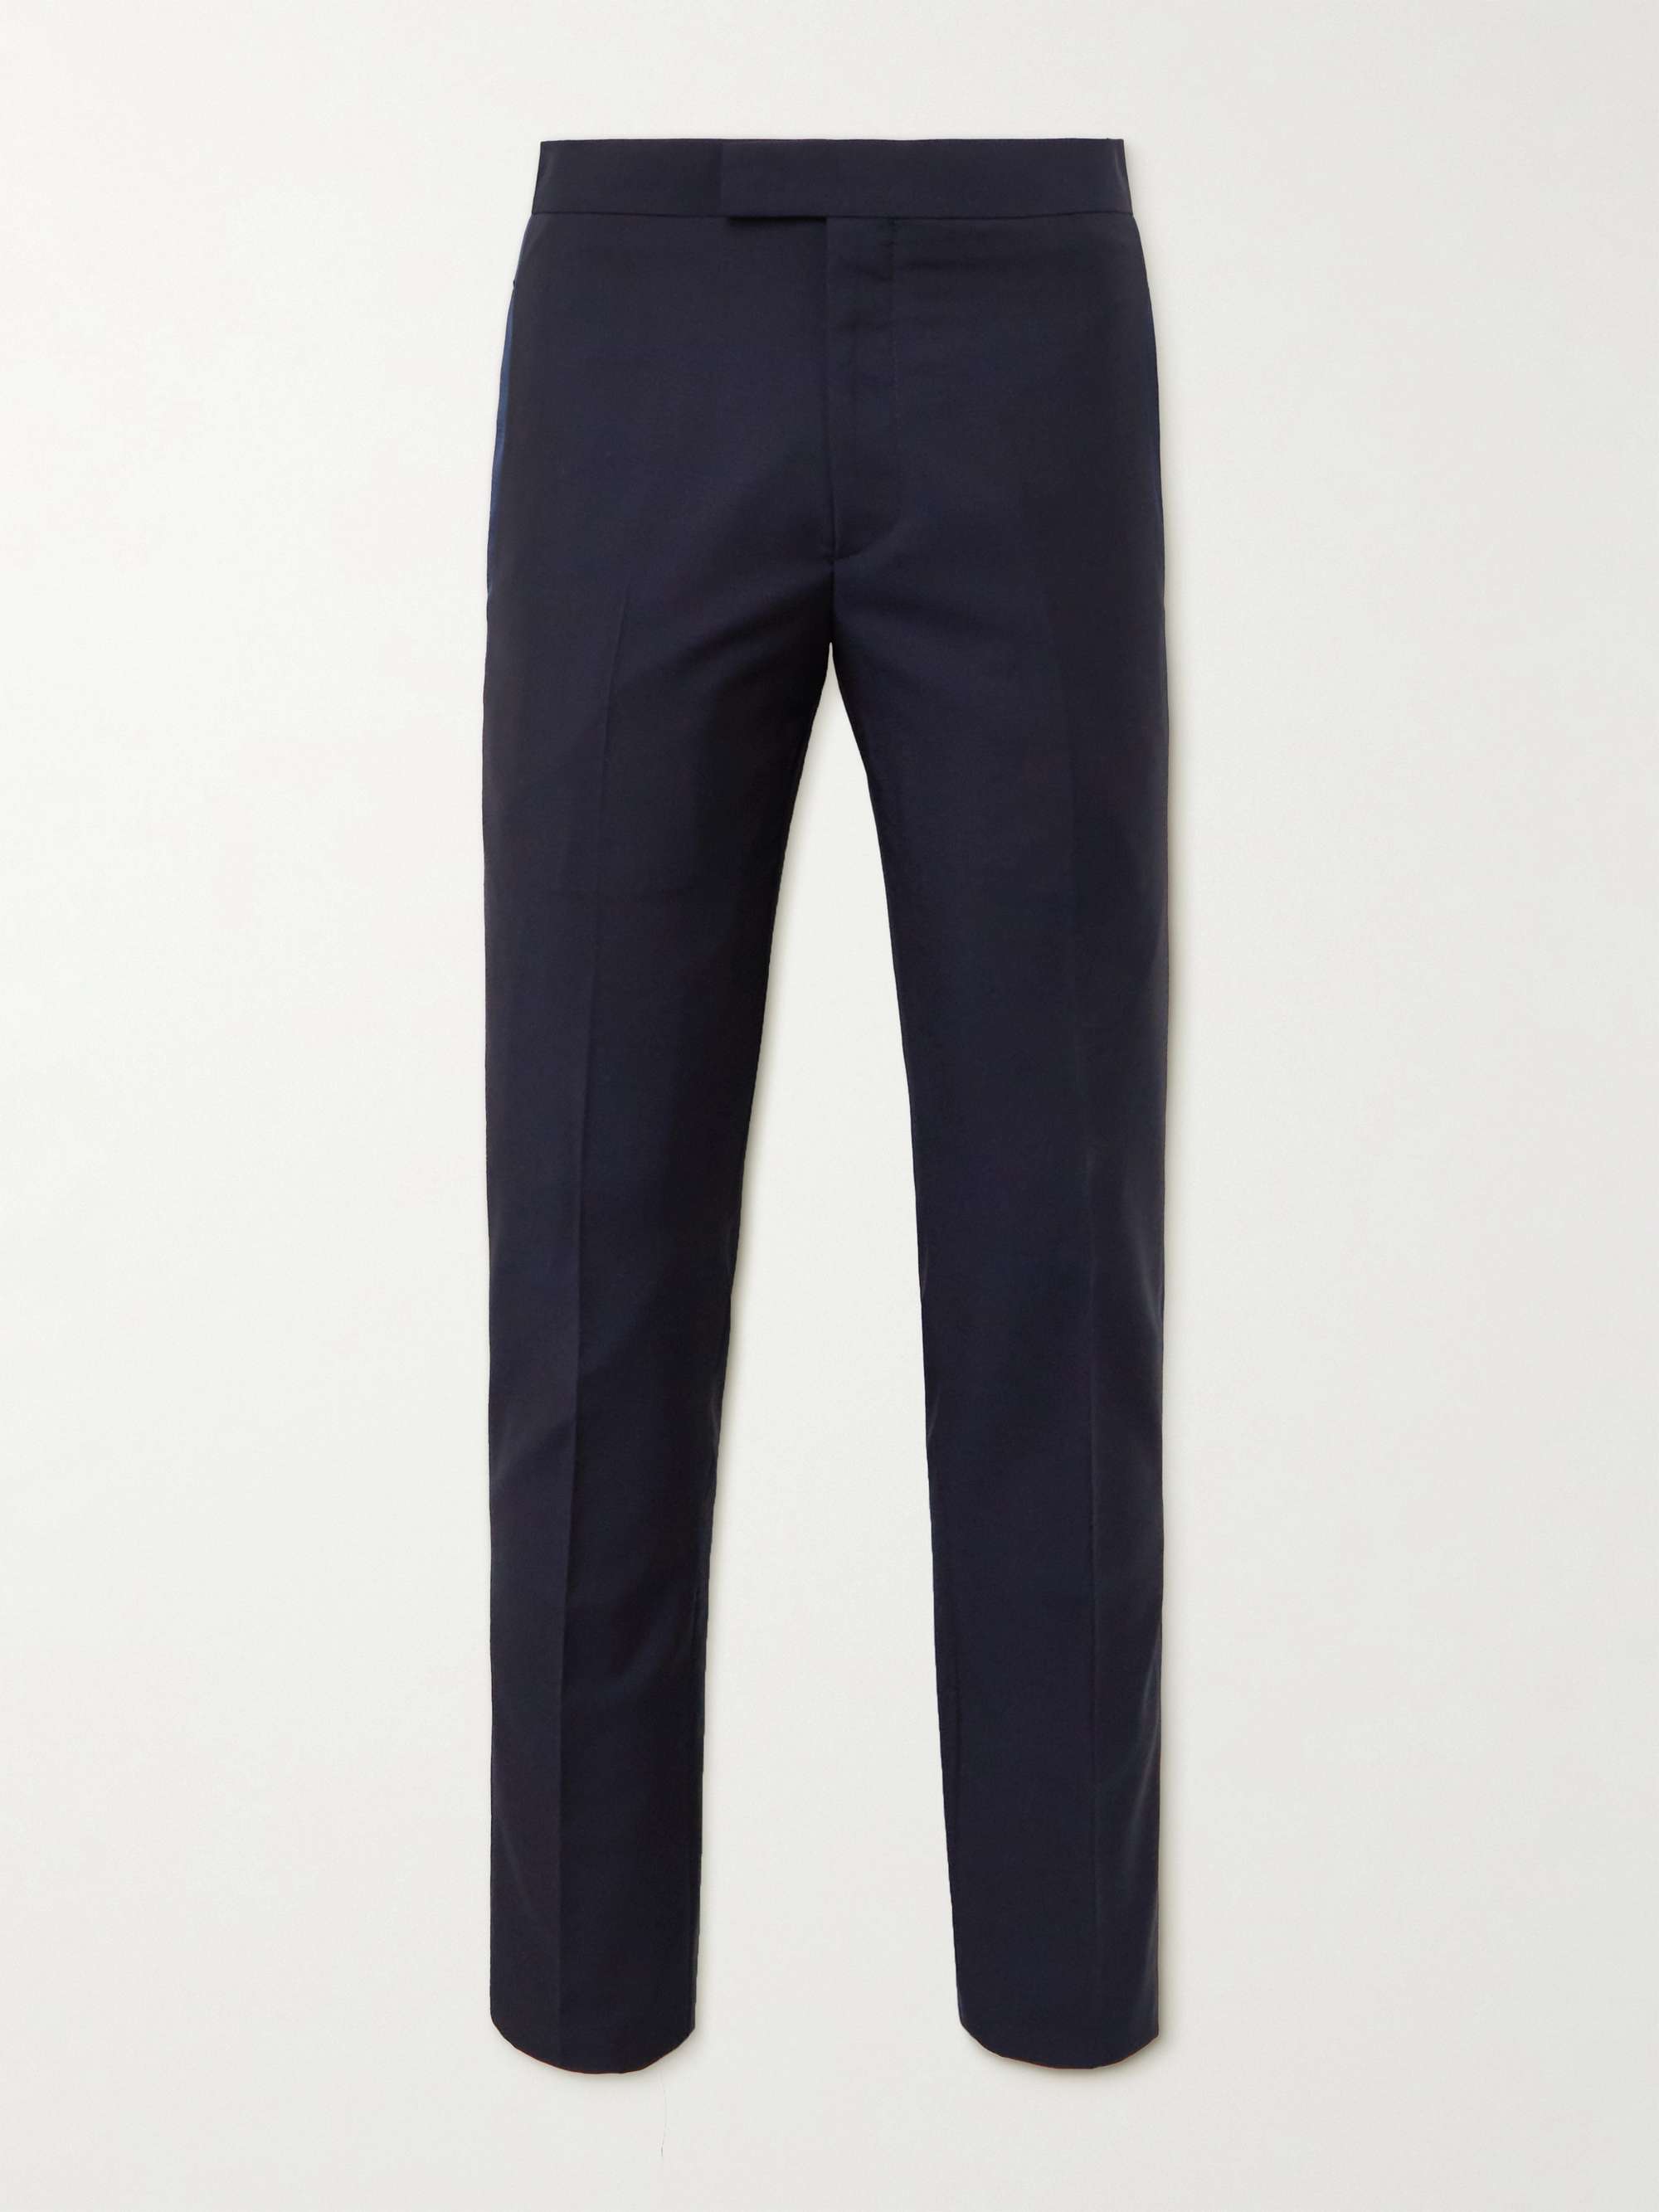 PAUL SMITH Slim-Fit Satin-Trimmed Pleated Wool and Mohair-Blend Tuxedo Trousers